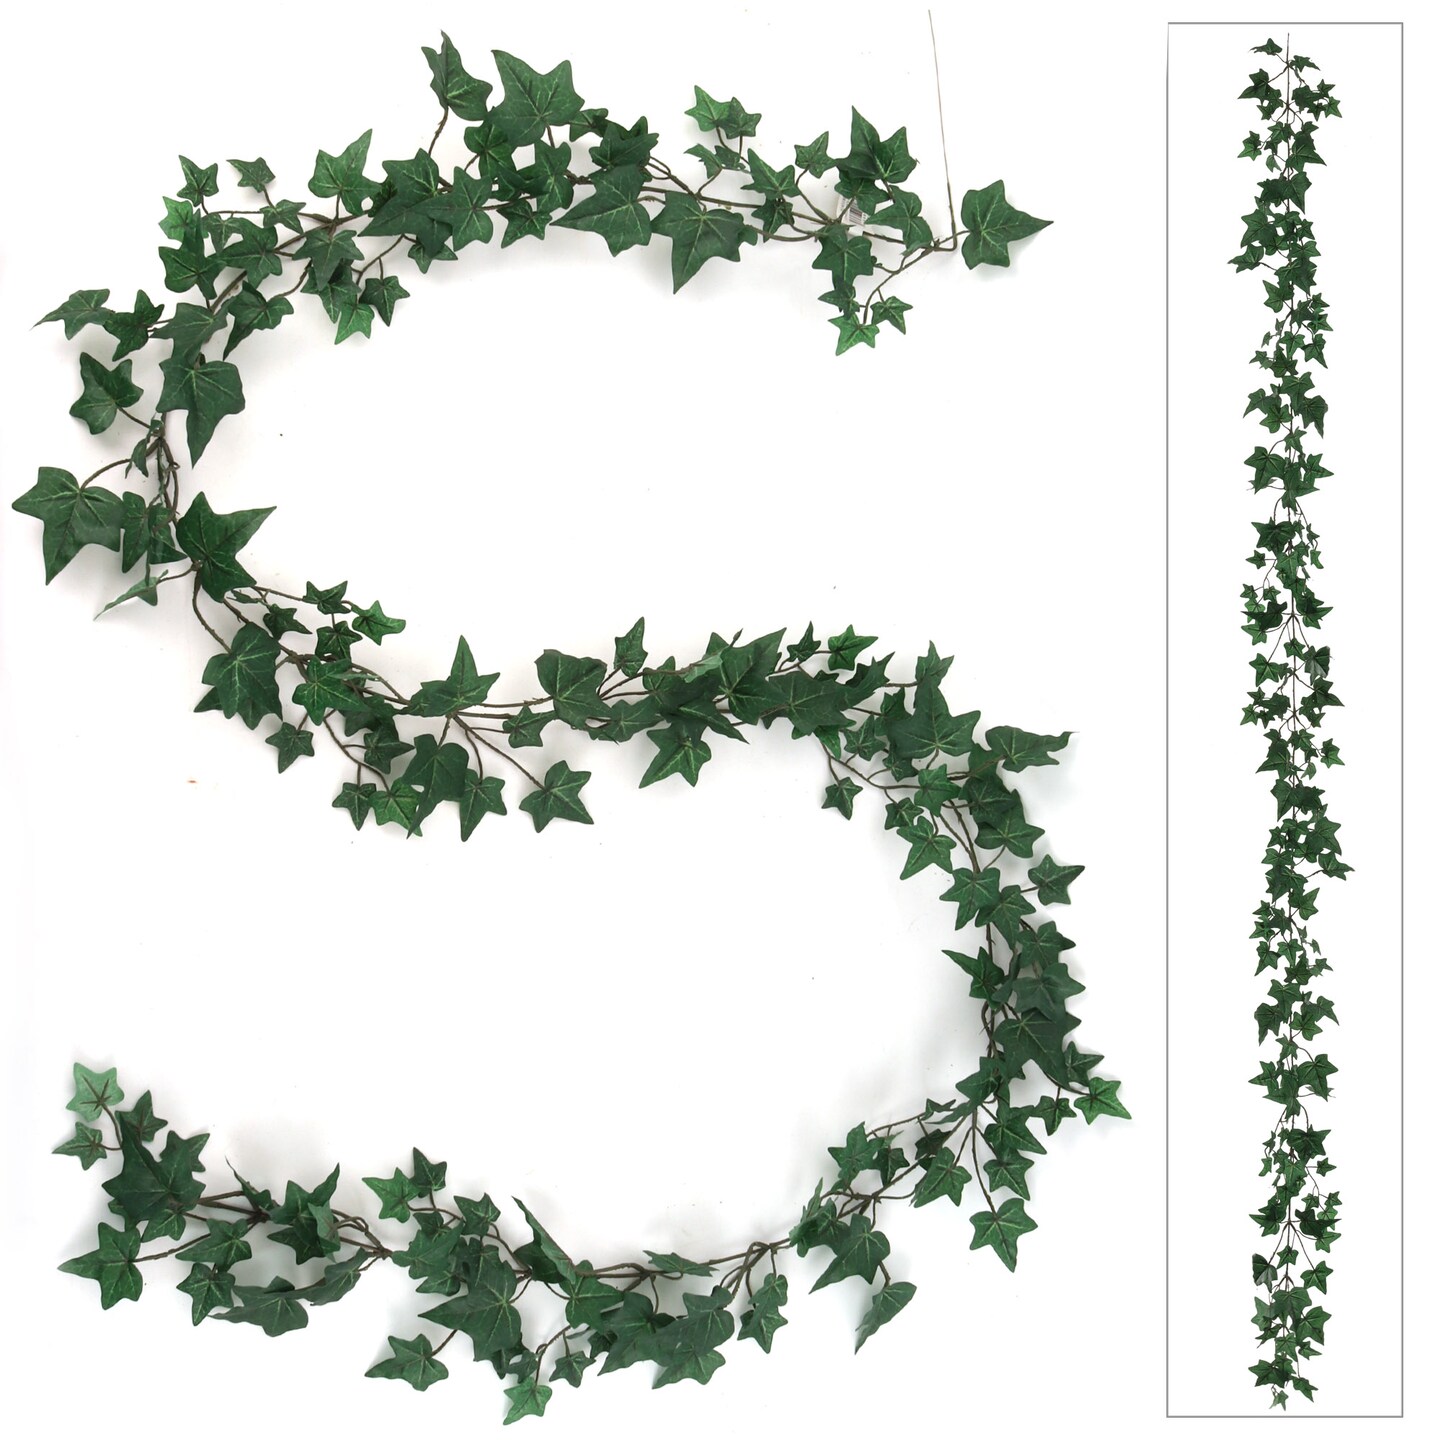 Elegant 6&#x27; English Ivy Garland with 185 Lush Leaves - Vibrant Green, Perfect for Home D&#xE9;cor and Celebrations